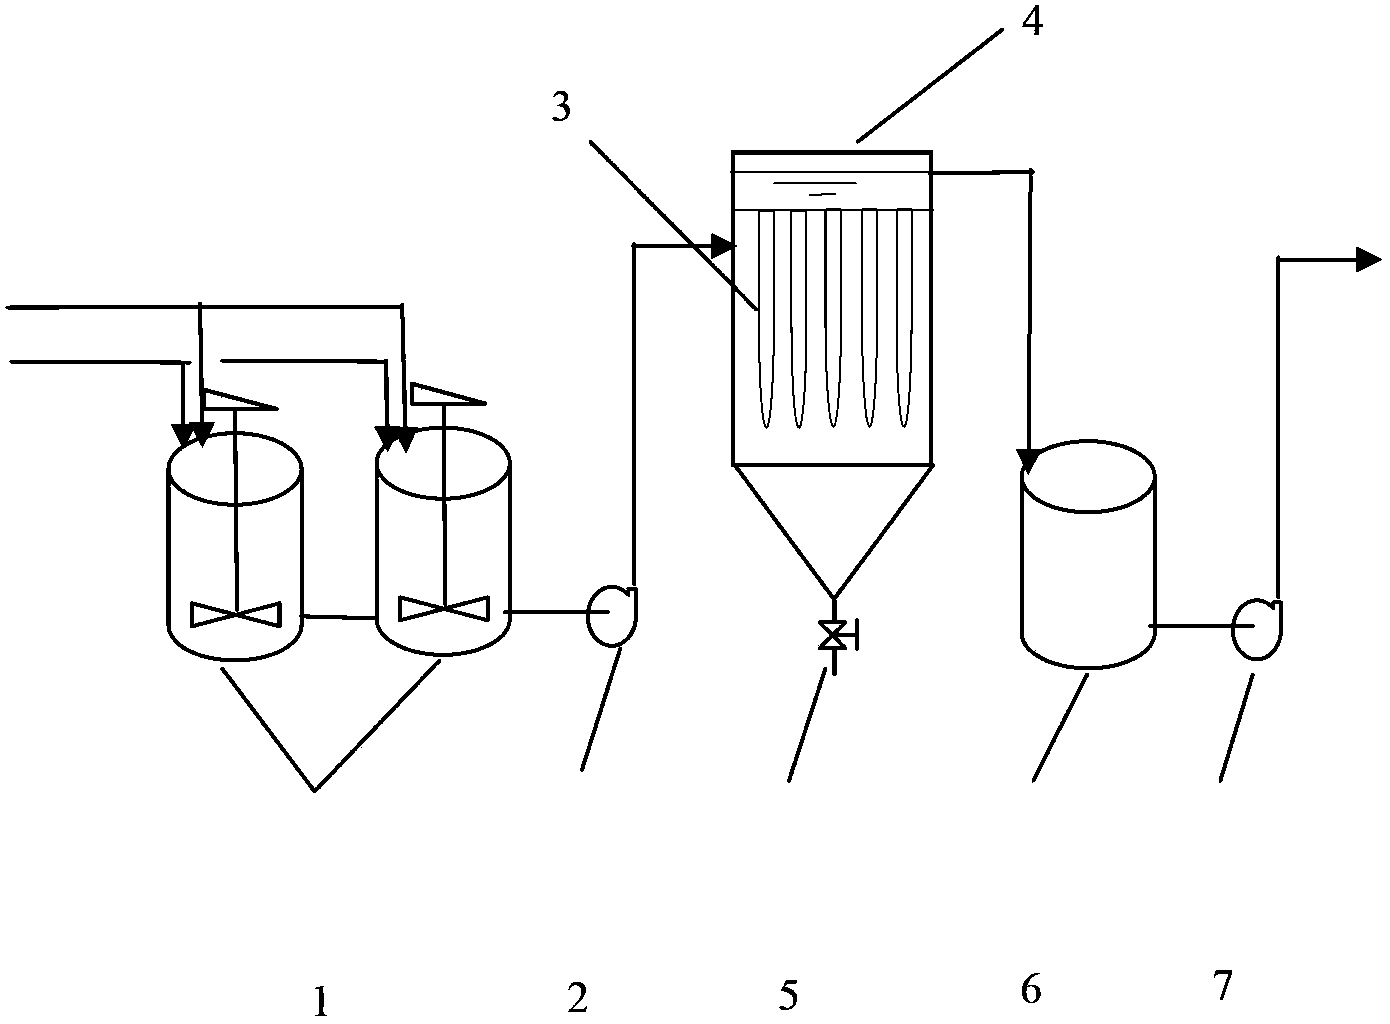 Method for desalting sewage by using membrane separation technology